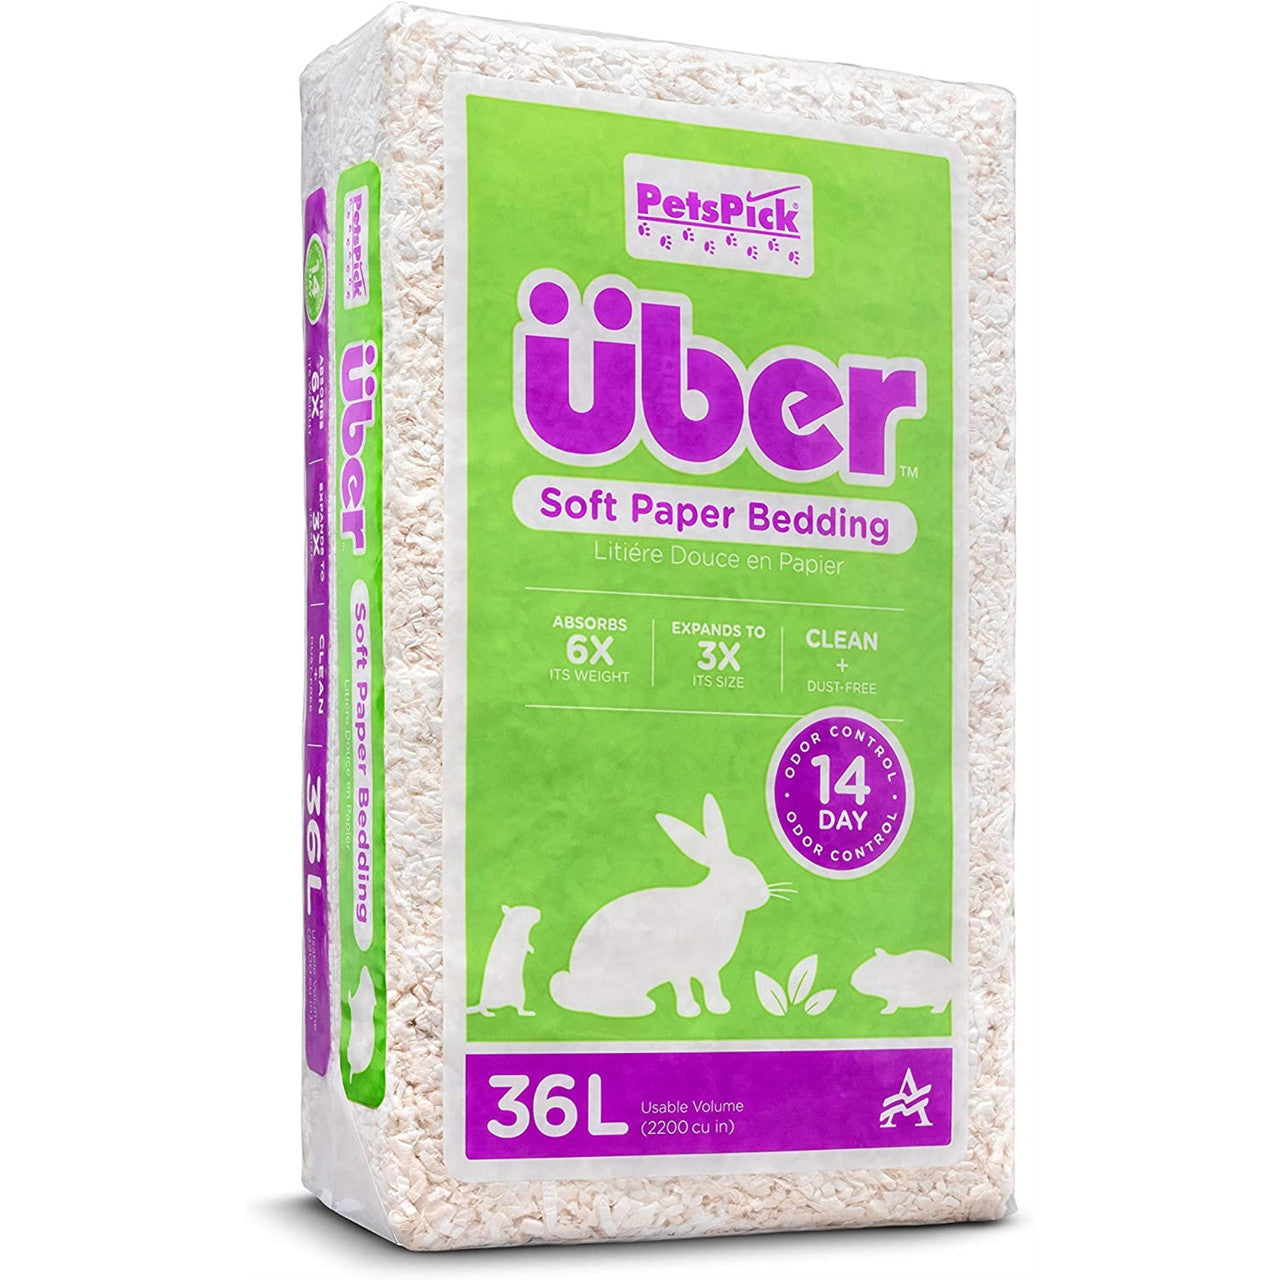 PetsPick Uber Soft Paper Pet Bedding for Small Animals, Natural 36L